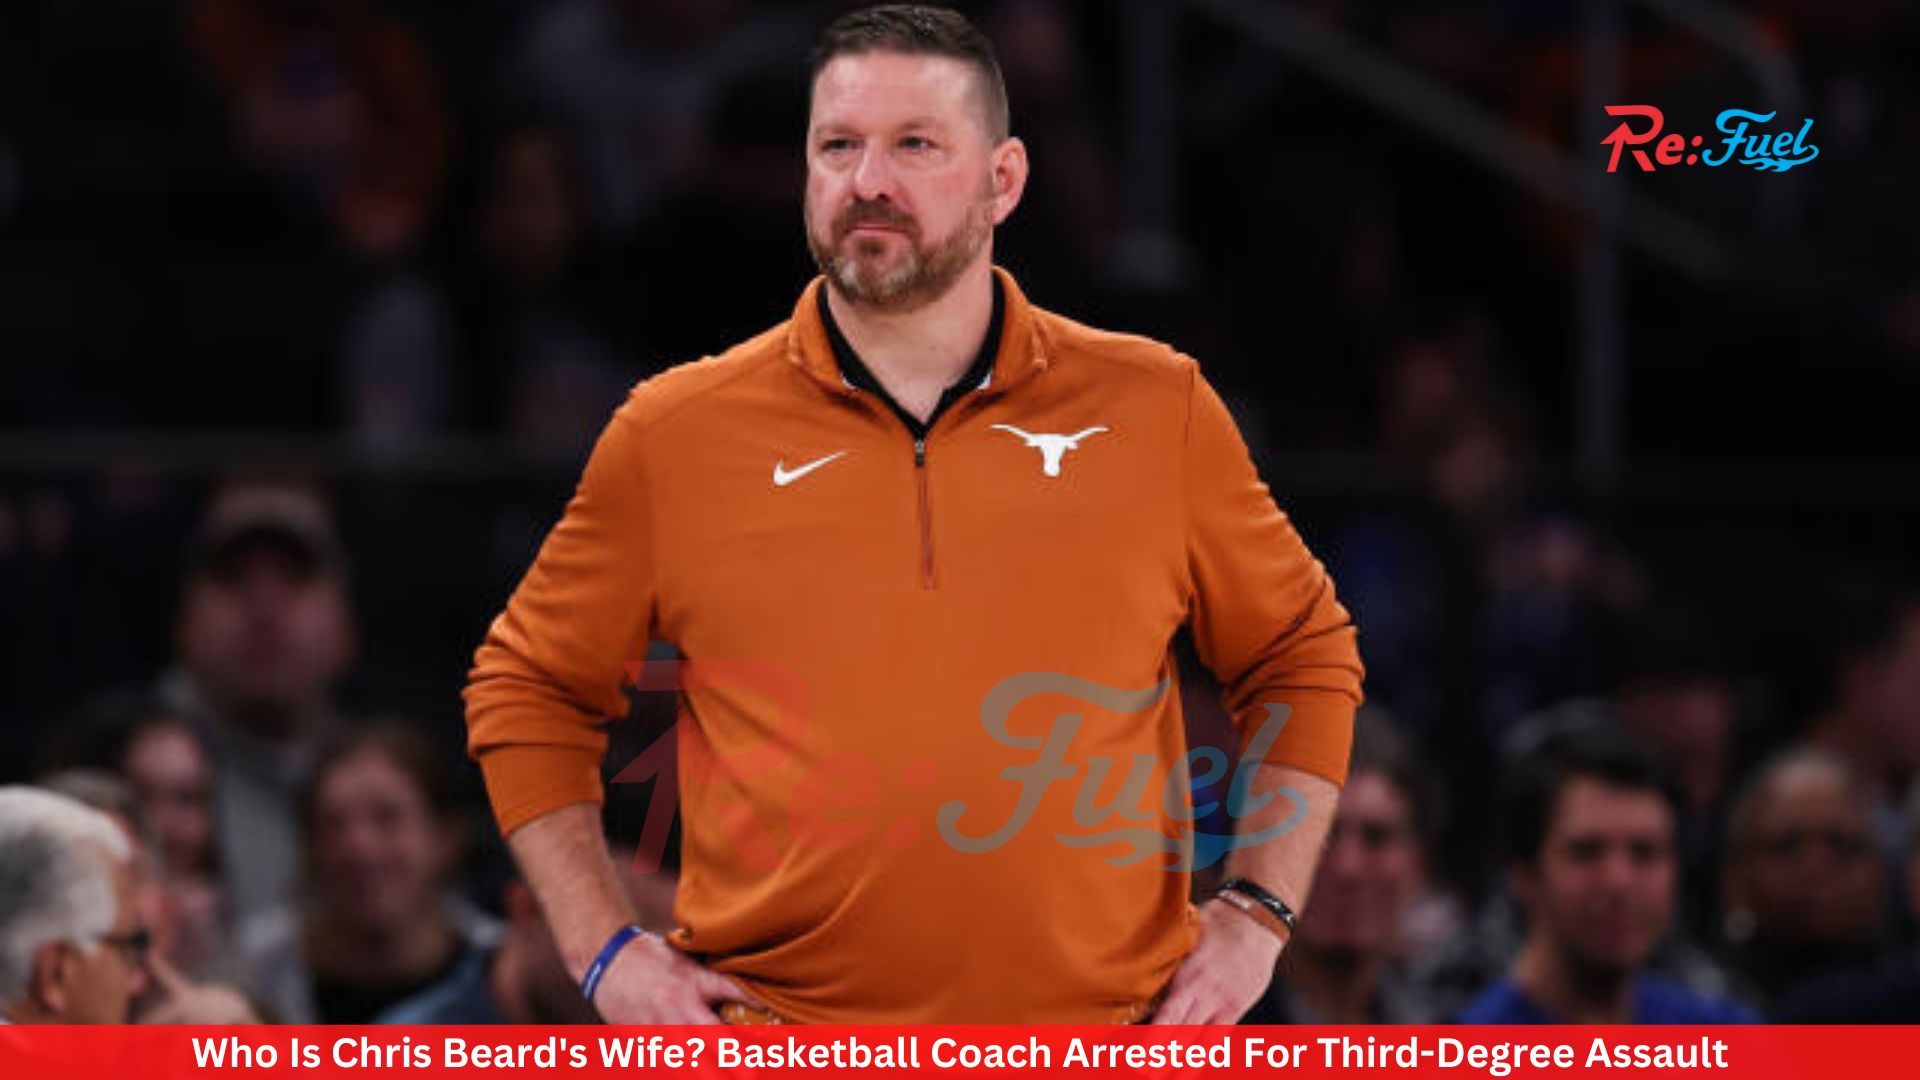 Who Is Chris Beard's Wife? Basketball Coach Arrested For Third-Degree Assault